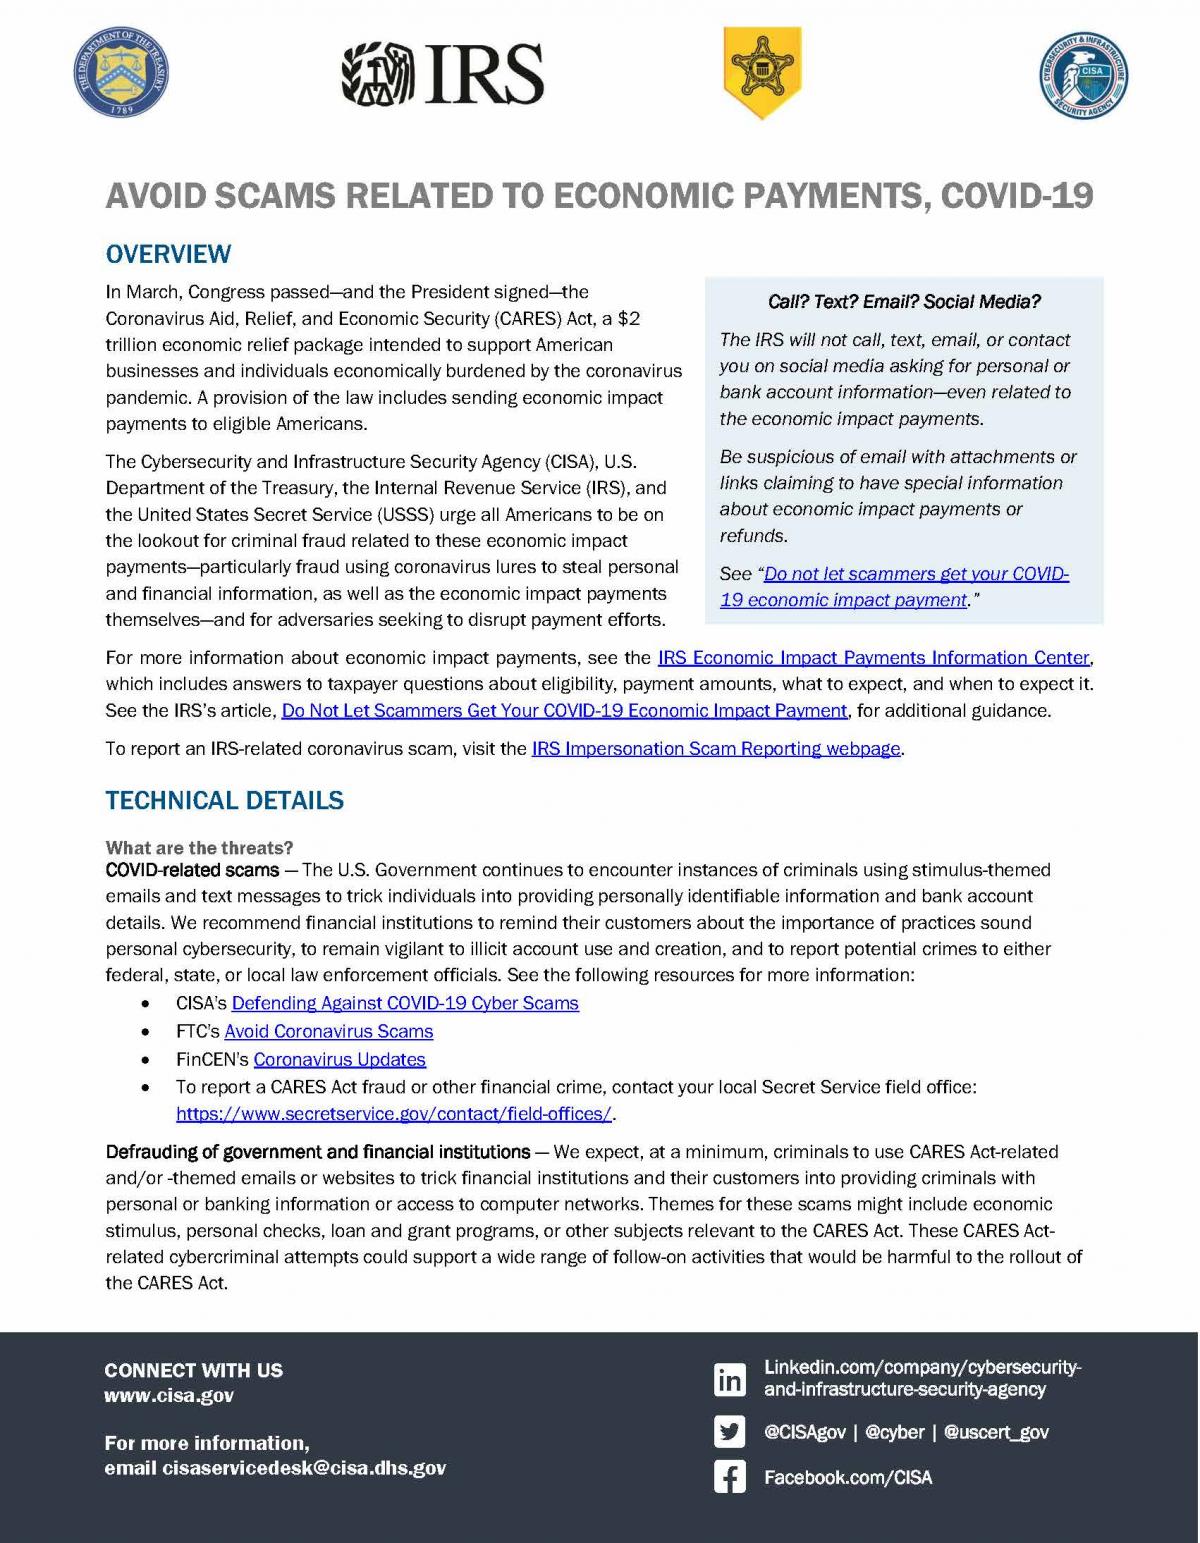 AVOID SCAMS RELATED TO ECONOMIC PAYMENTS, COVID-19 page 1